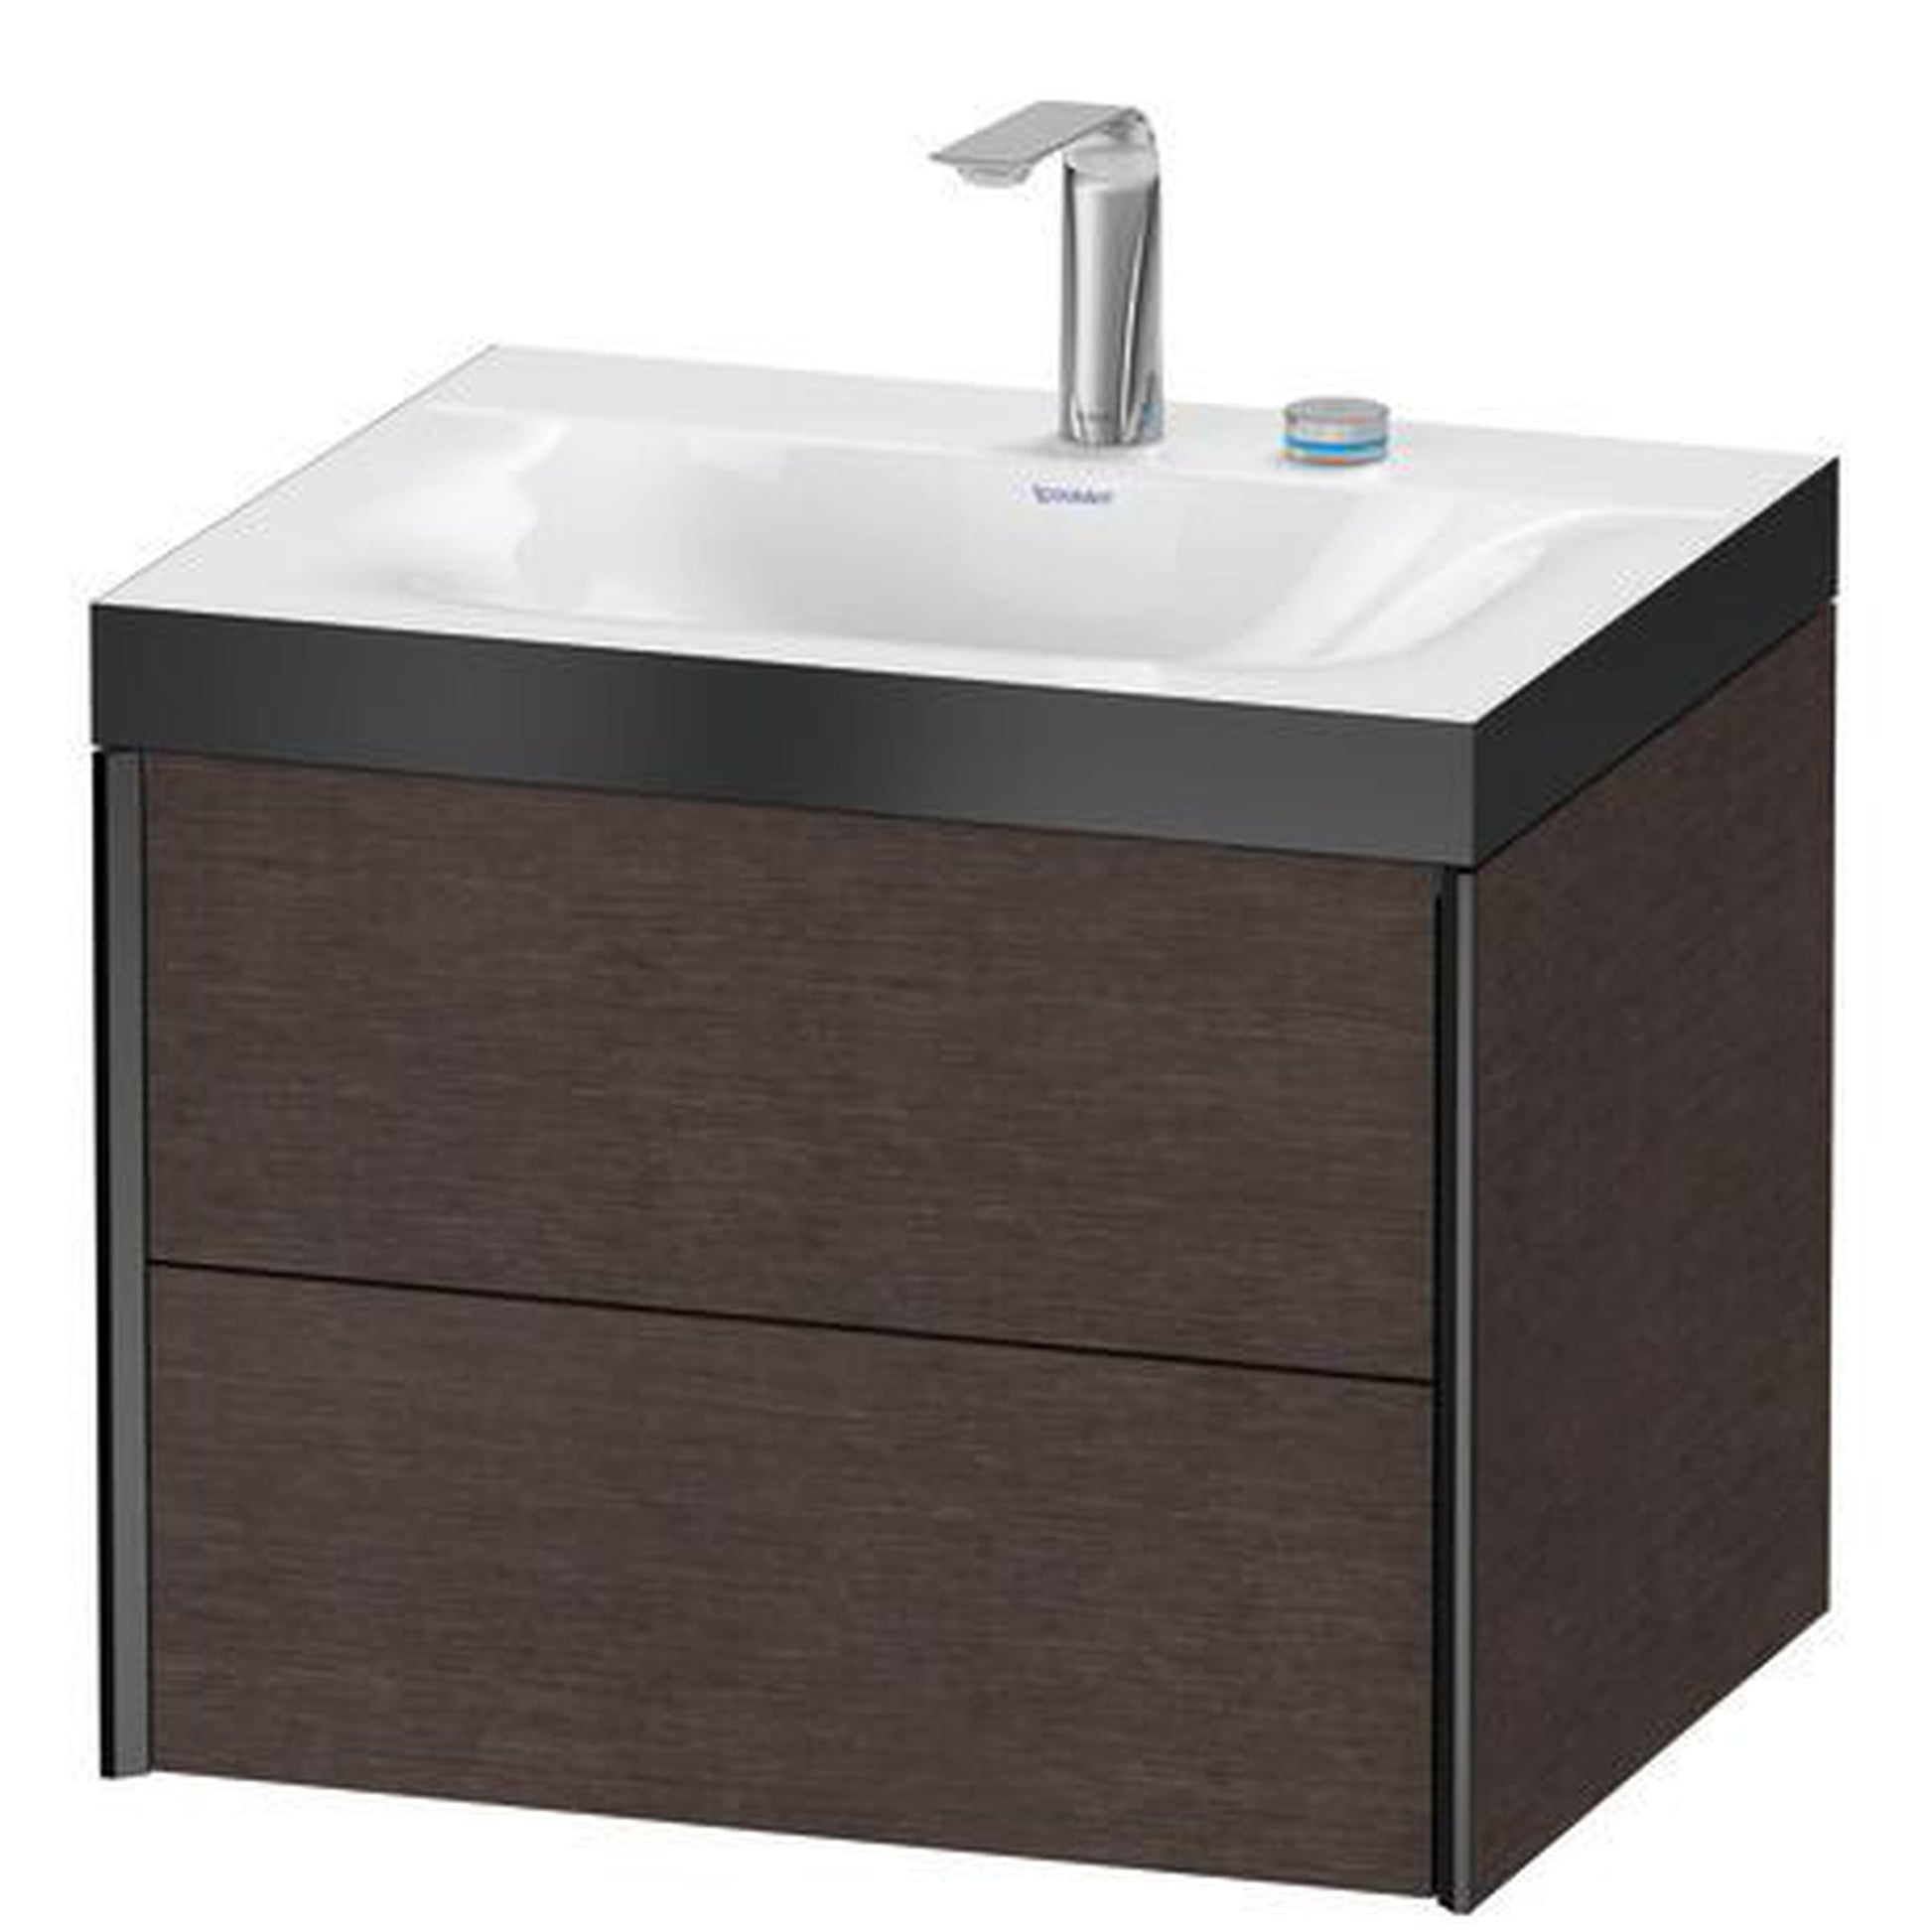 Duravit Xviu 24" x 20" x 19" Two Drawer C-Bonded Wall-Mount Vanity Kit With Two Tap Holes, Dark Brushed Oak (XV4614EB272P)